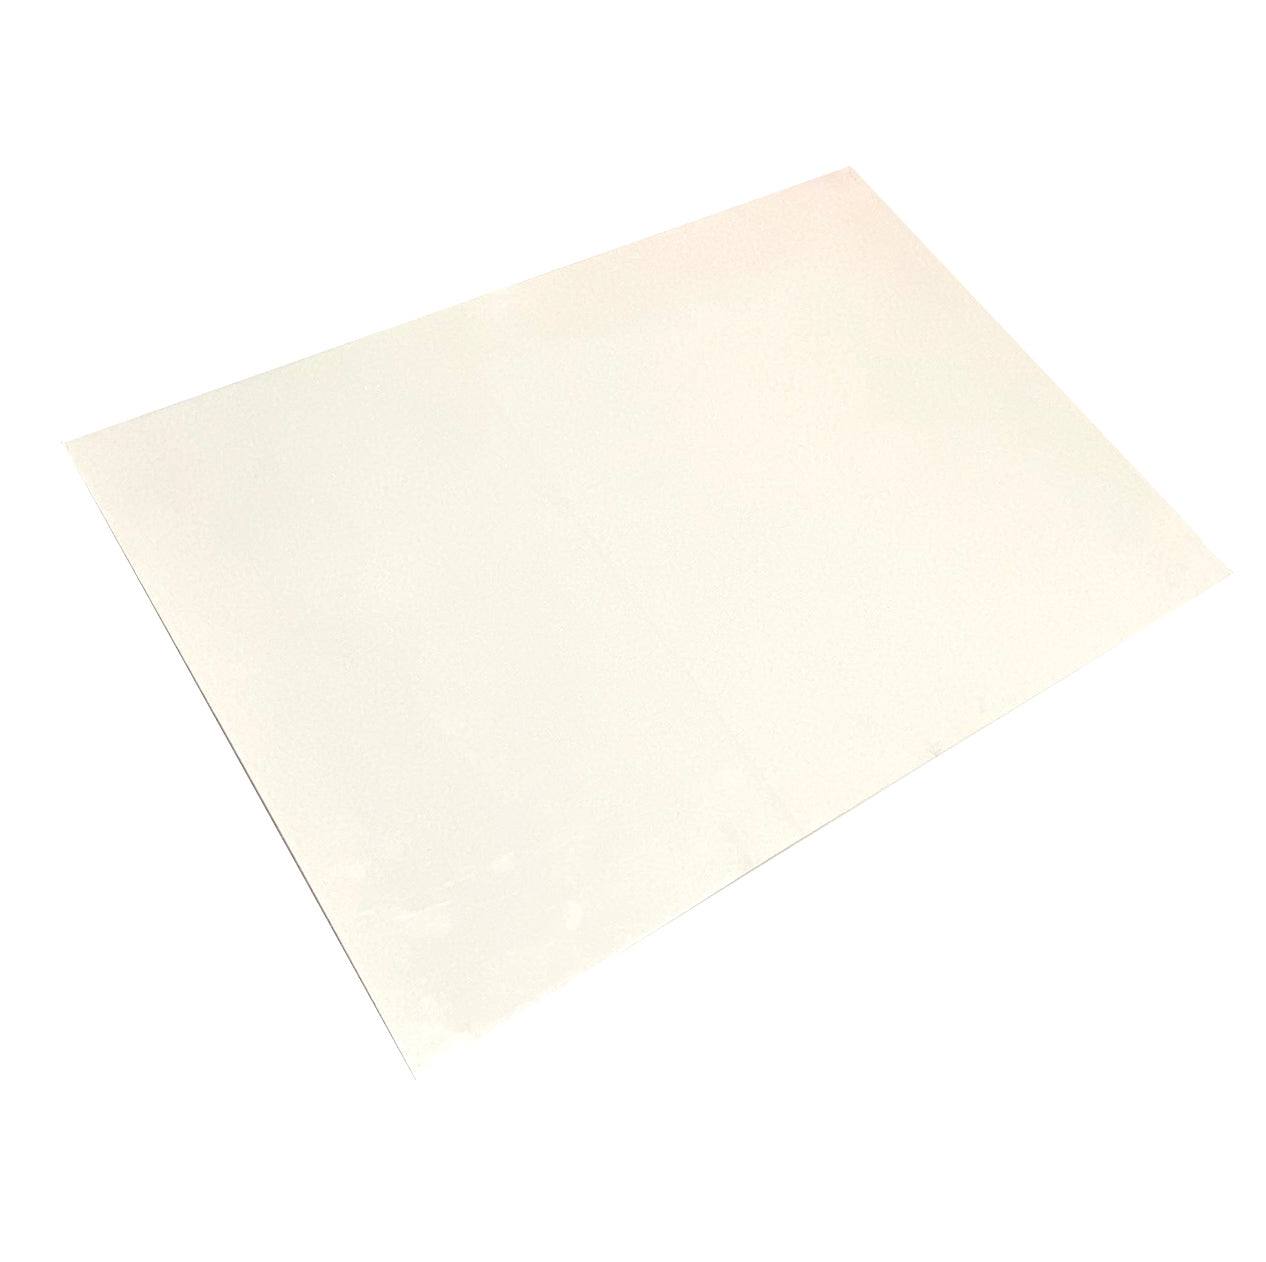 Sidecar Plastic Sheet 2mm Thick Panel Cover